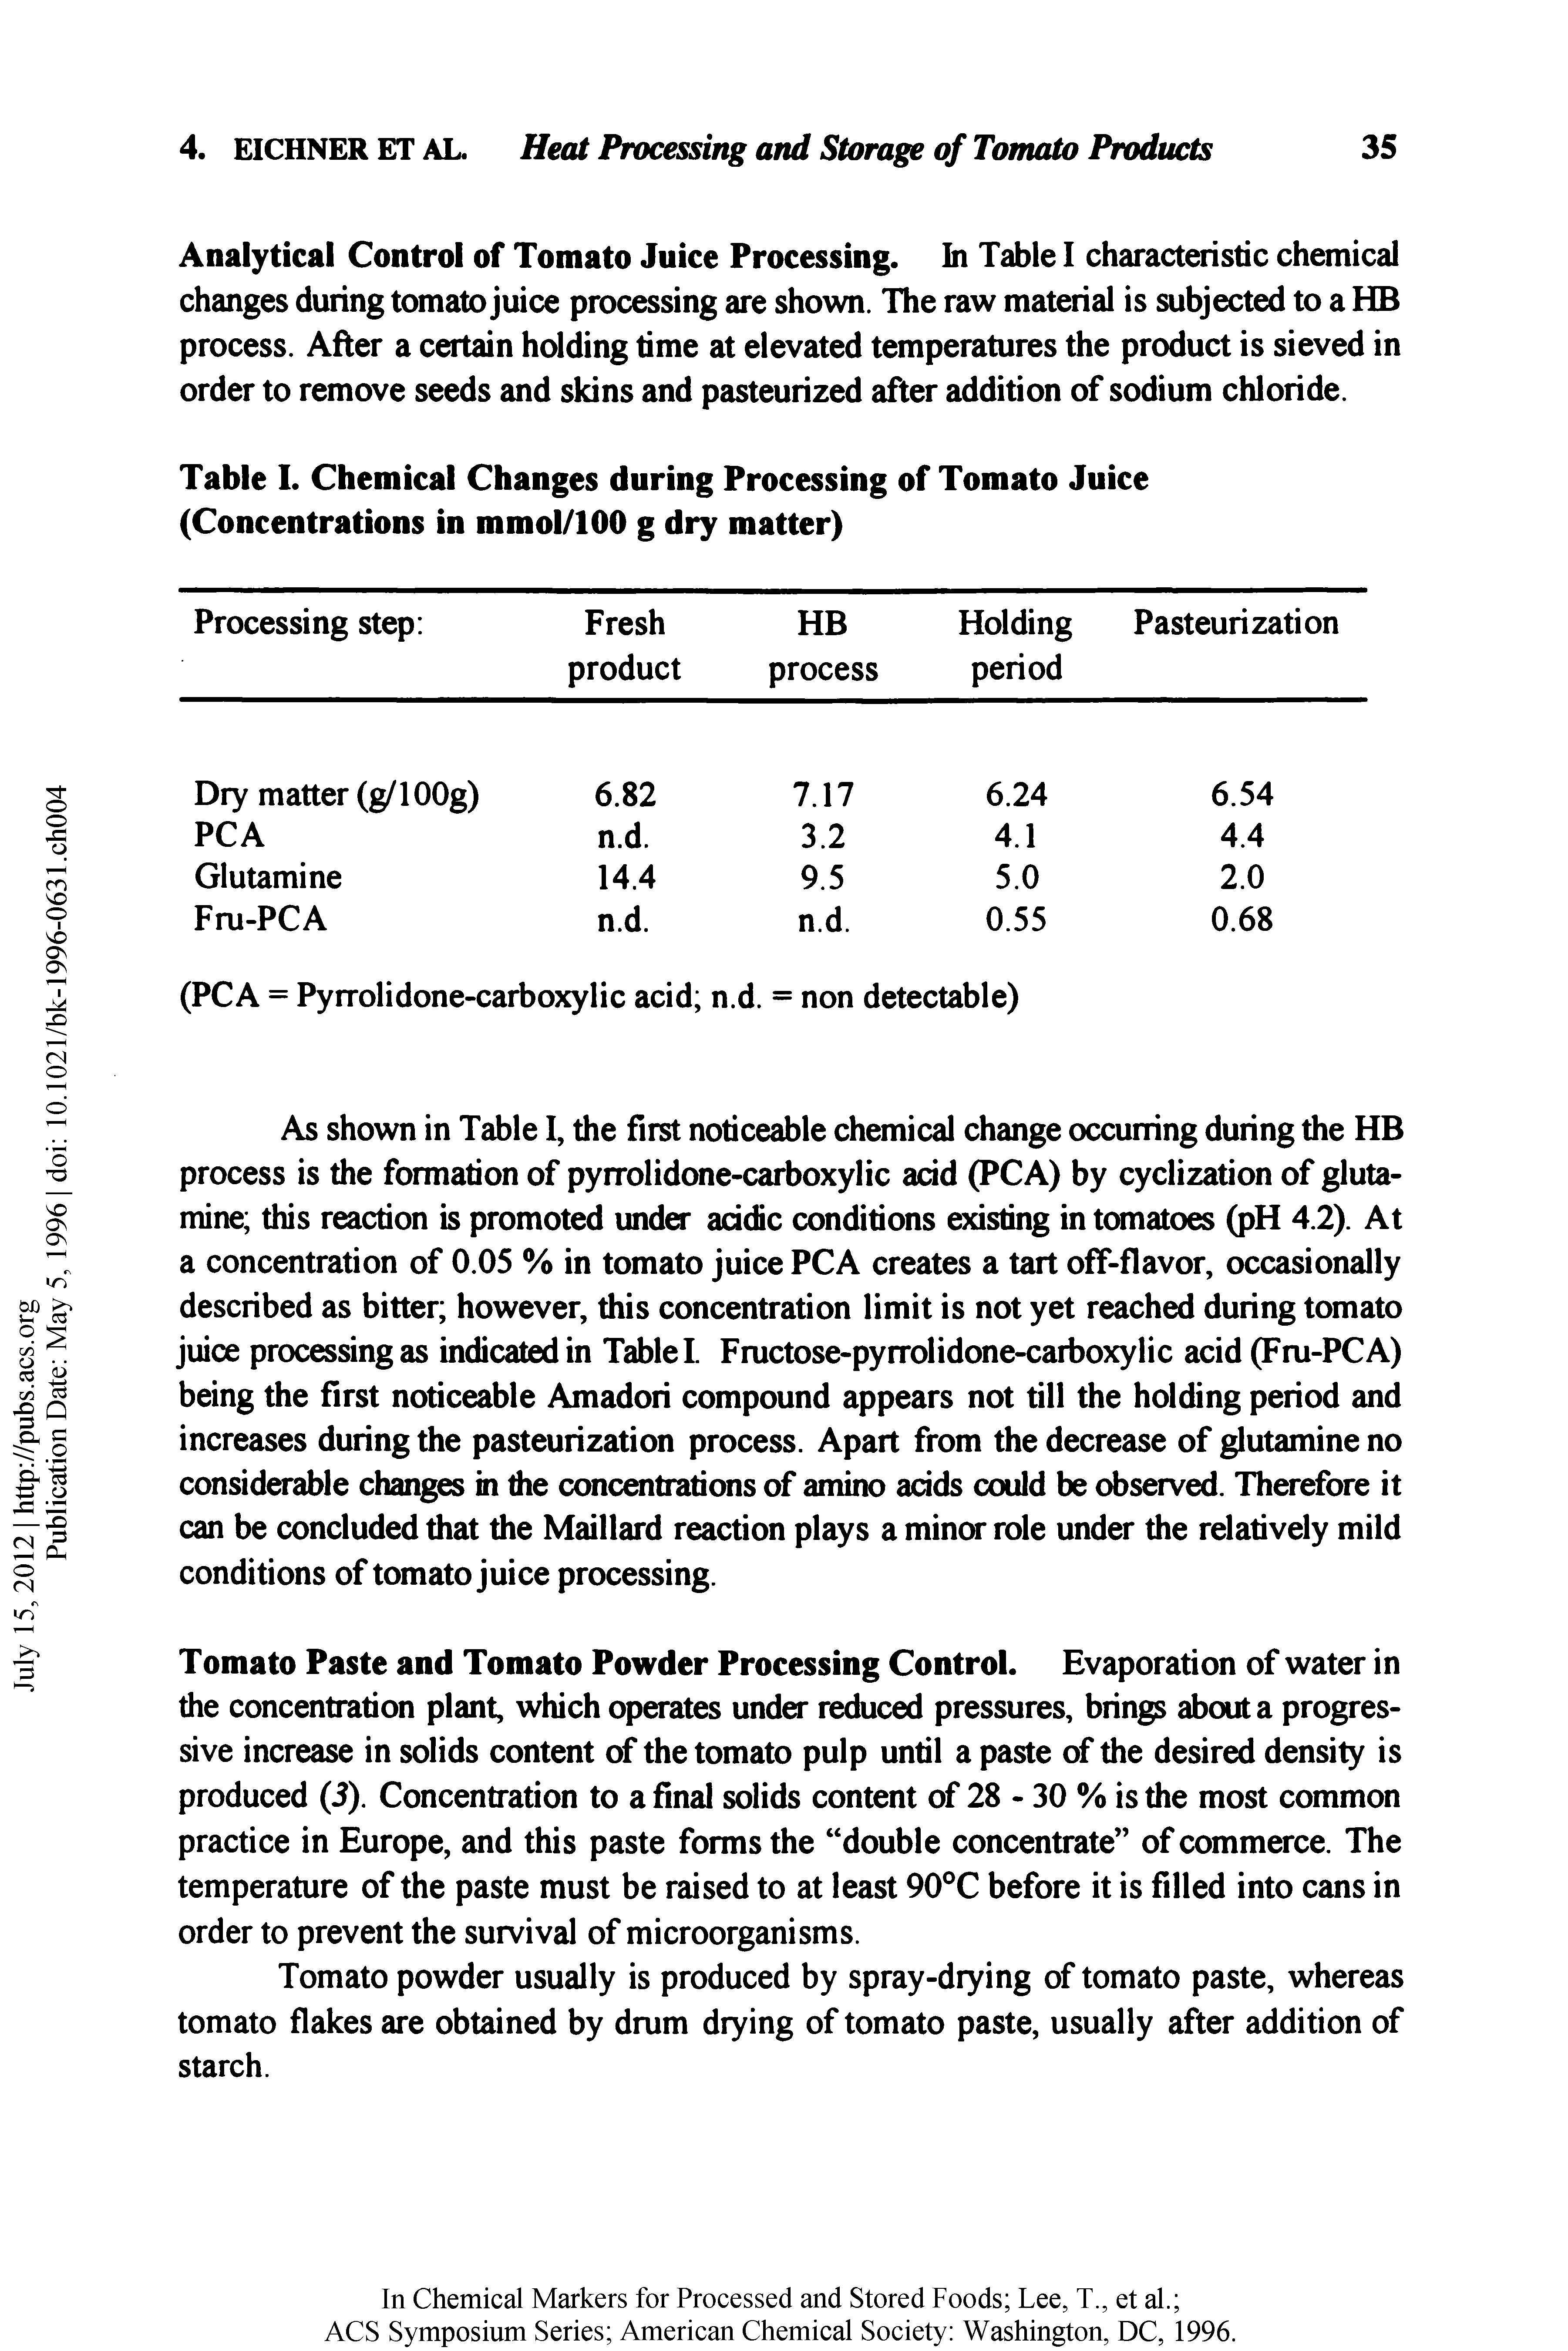 Table I. Chemical Changes during Processing of Tomato Juice (Concentrations in mmol/100 g dry matter)...